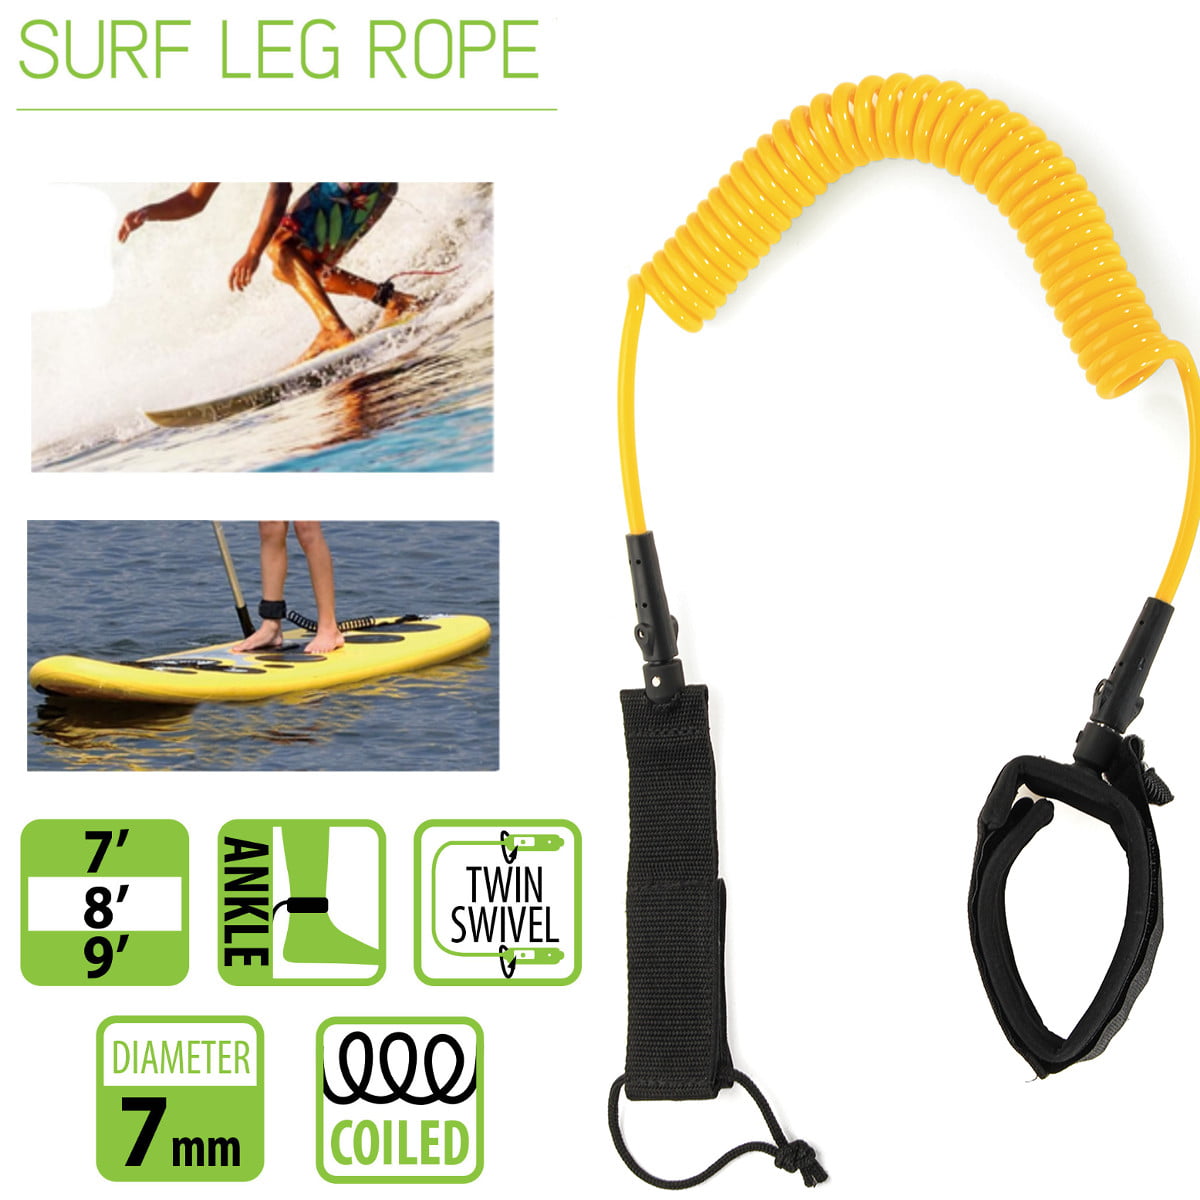 8 Colors SUP Replacement Leg Rope for Longboard、Straight Surf Board、Shortboard、Bodyboard、Skimboards 6/7 mm Stand Up Paddle Board Surfboard Coiled Leash Surf Board leash 6/7/9 Feet Premium SUP Leash 